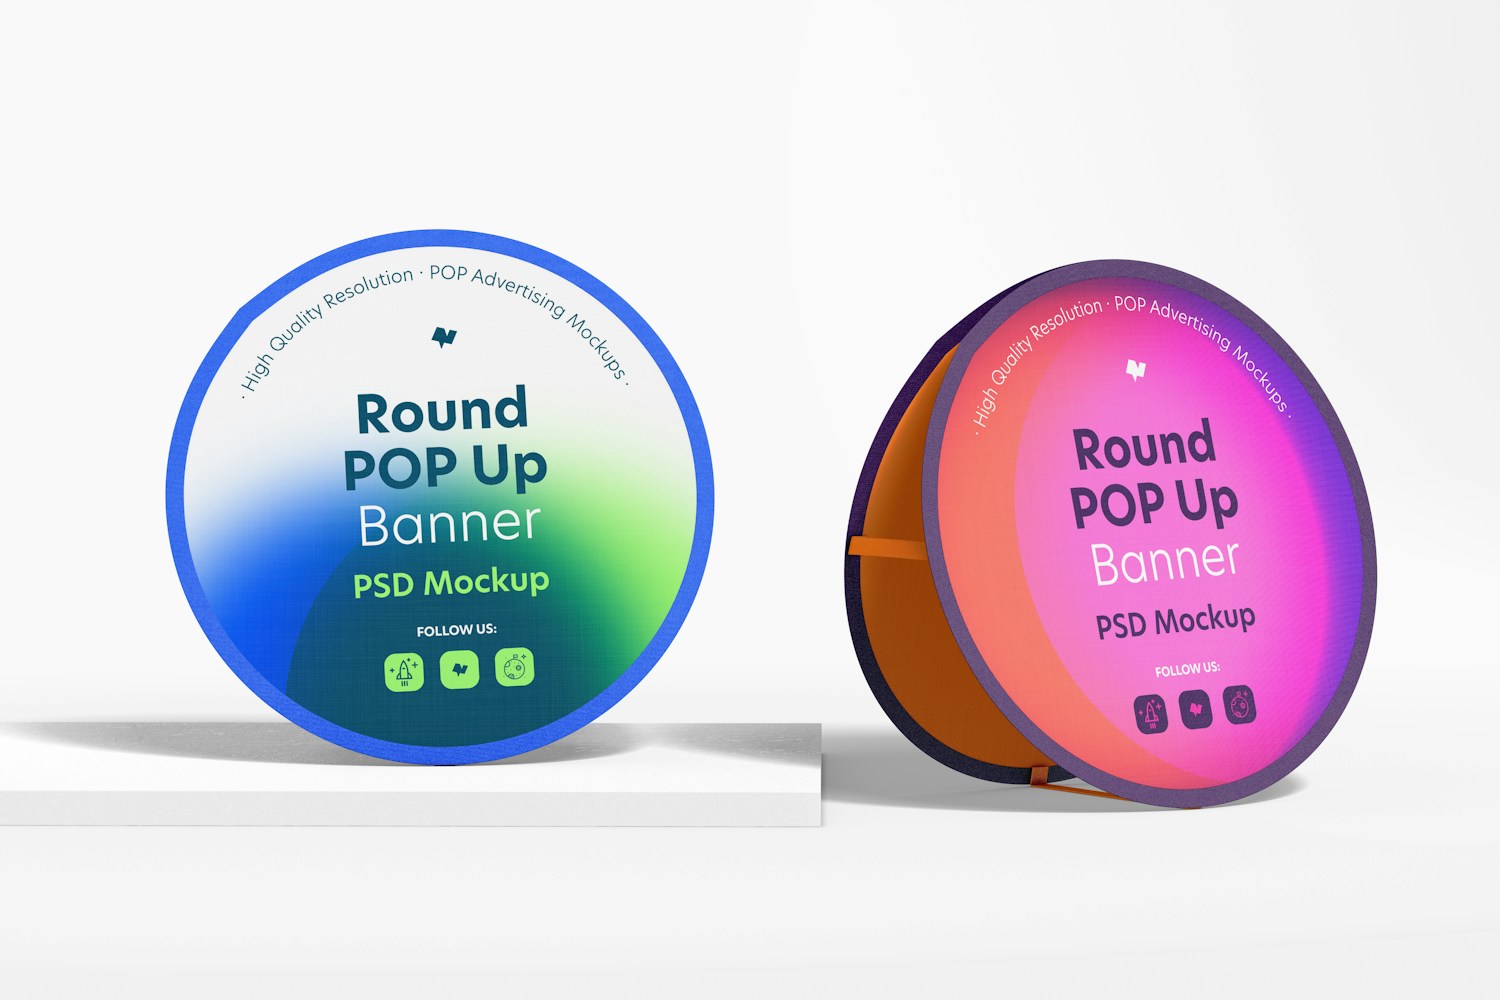 Round Pop Up Banners Mockup